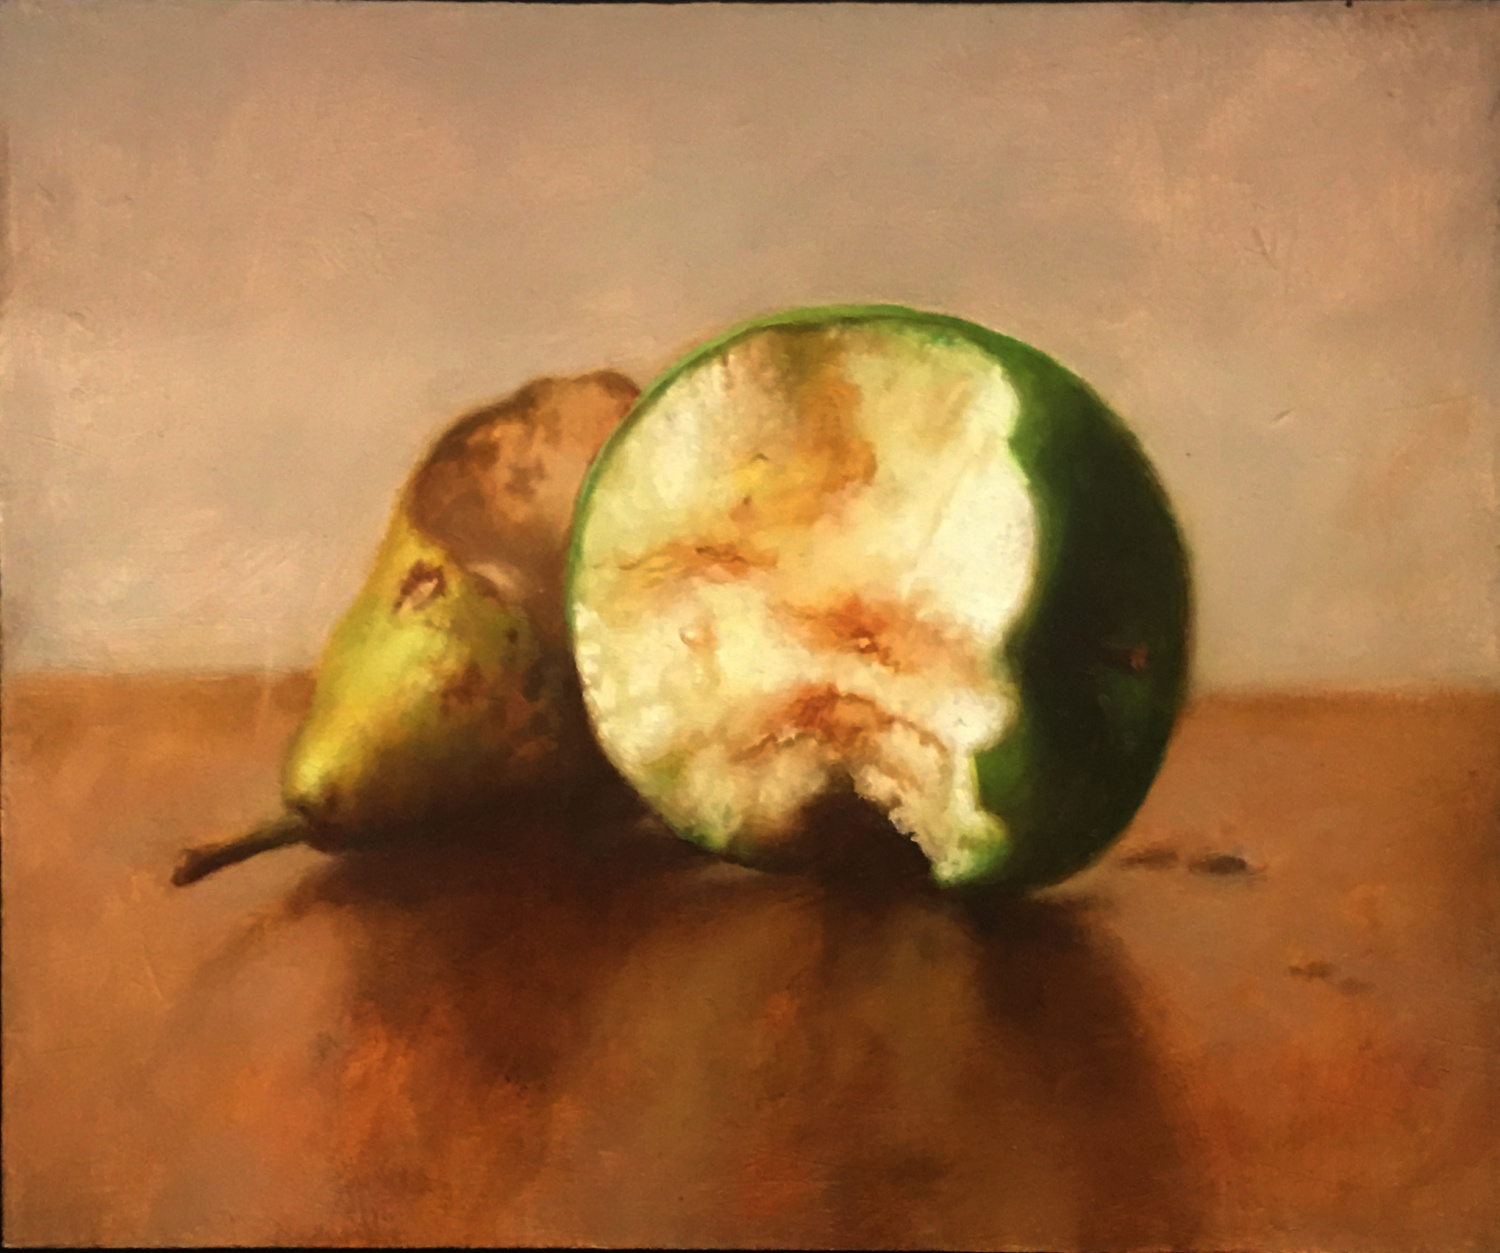 “Apple and Pear” by Kim Tkatch